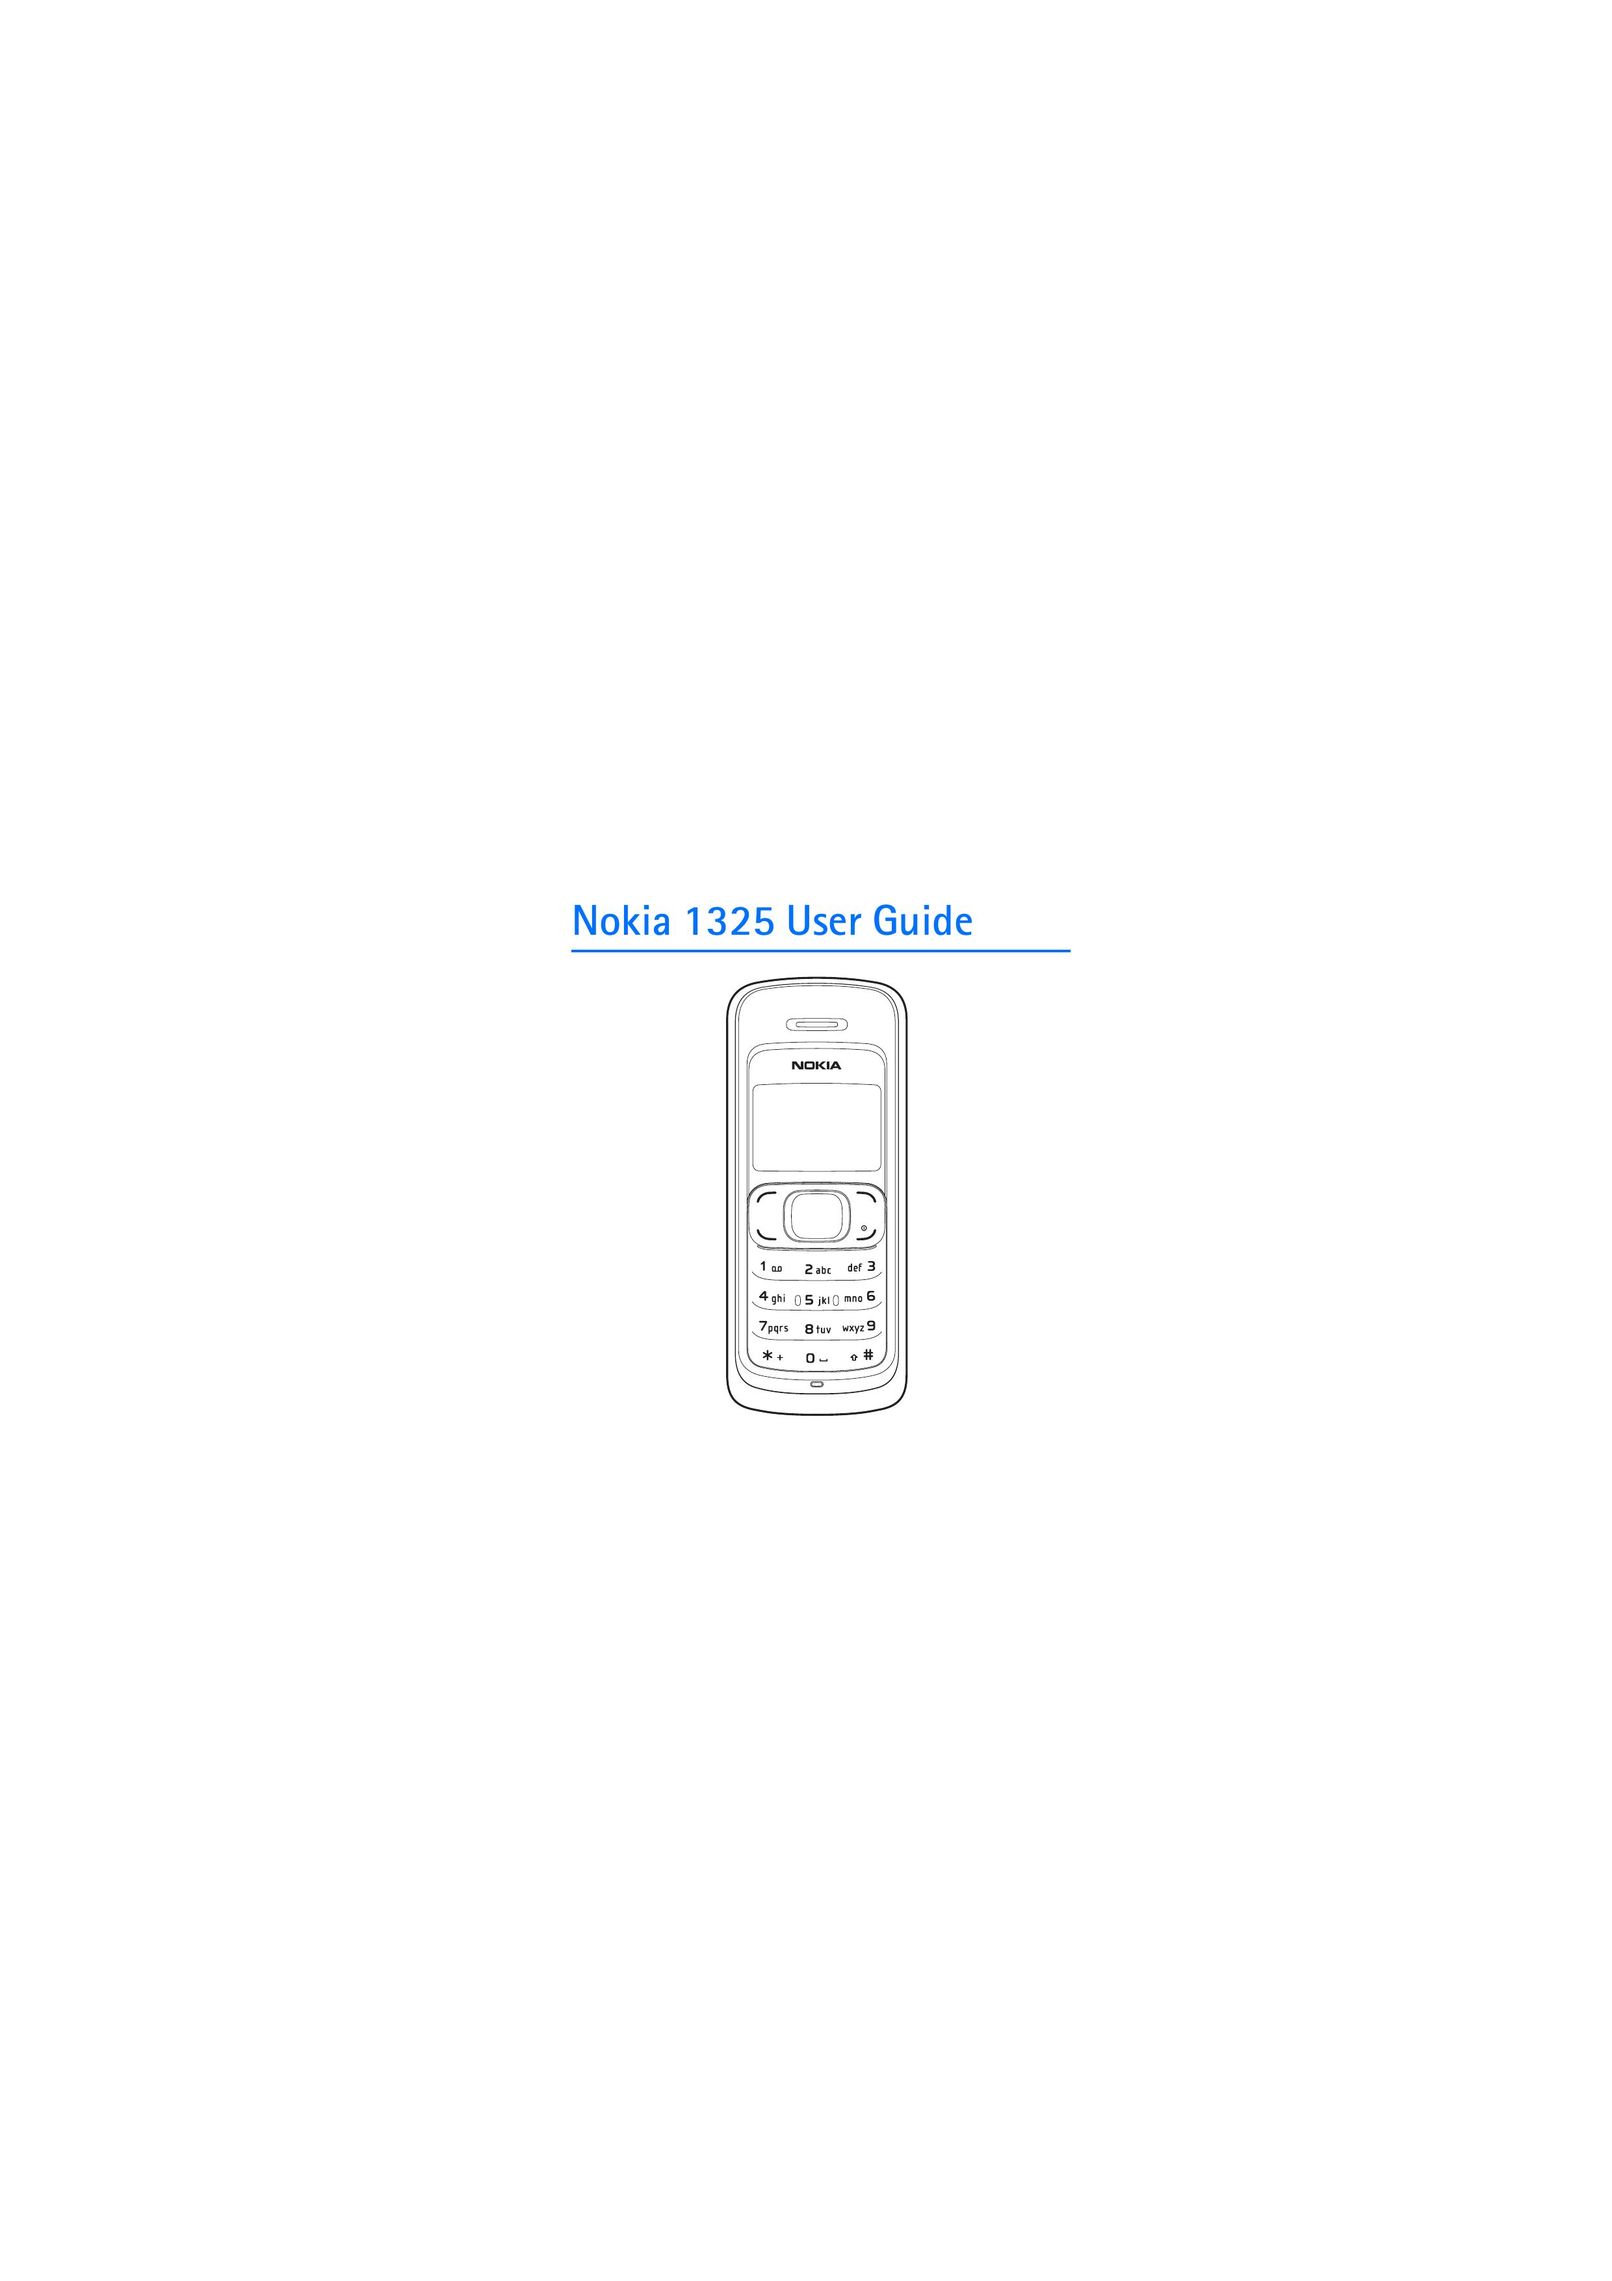 Nokia 1325 Cell Phone User Manual